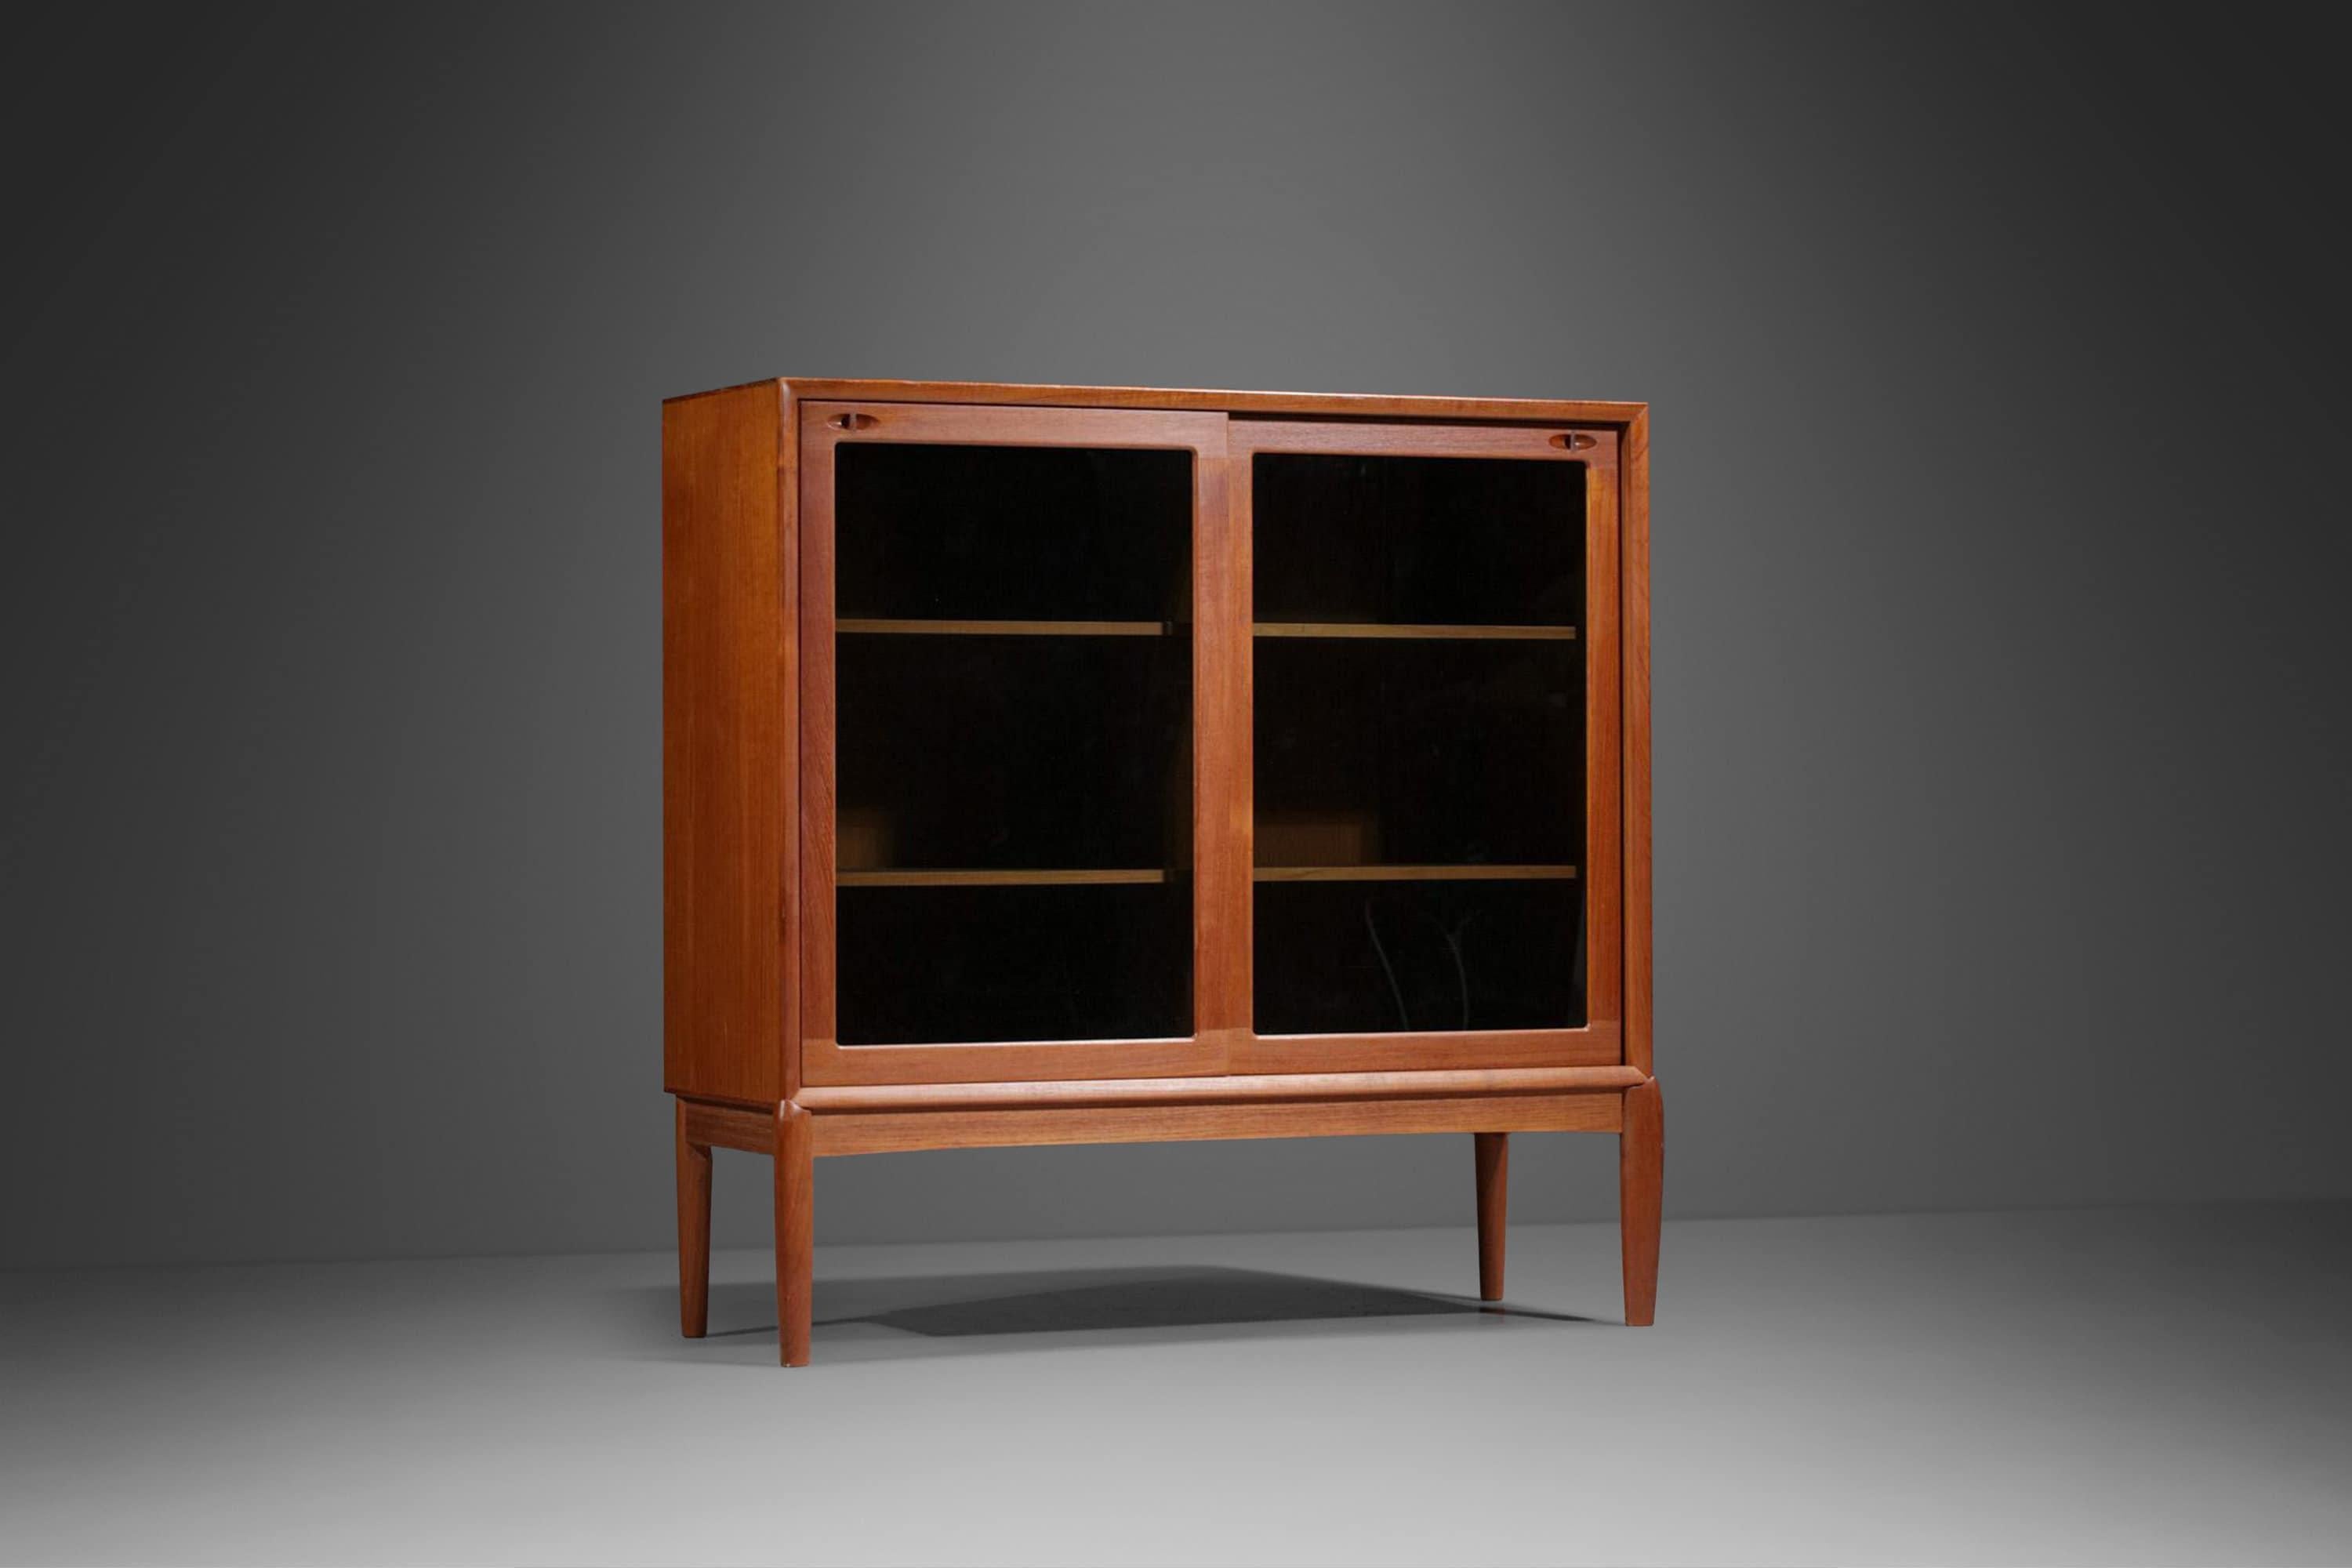 Equal parts beauty and functionality this exquisite display cabinet, designed by HW Klein for Bramin, is the epitome of functional art. Constructed mostly of solid teak with a veneered top and back featuring exceptional old-growth woodgrains this